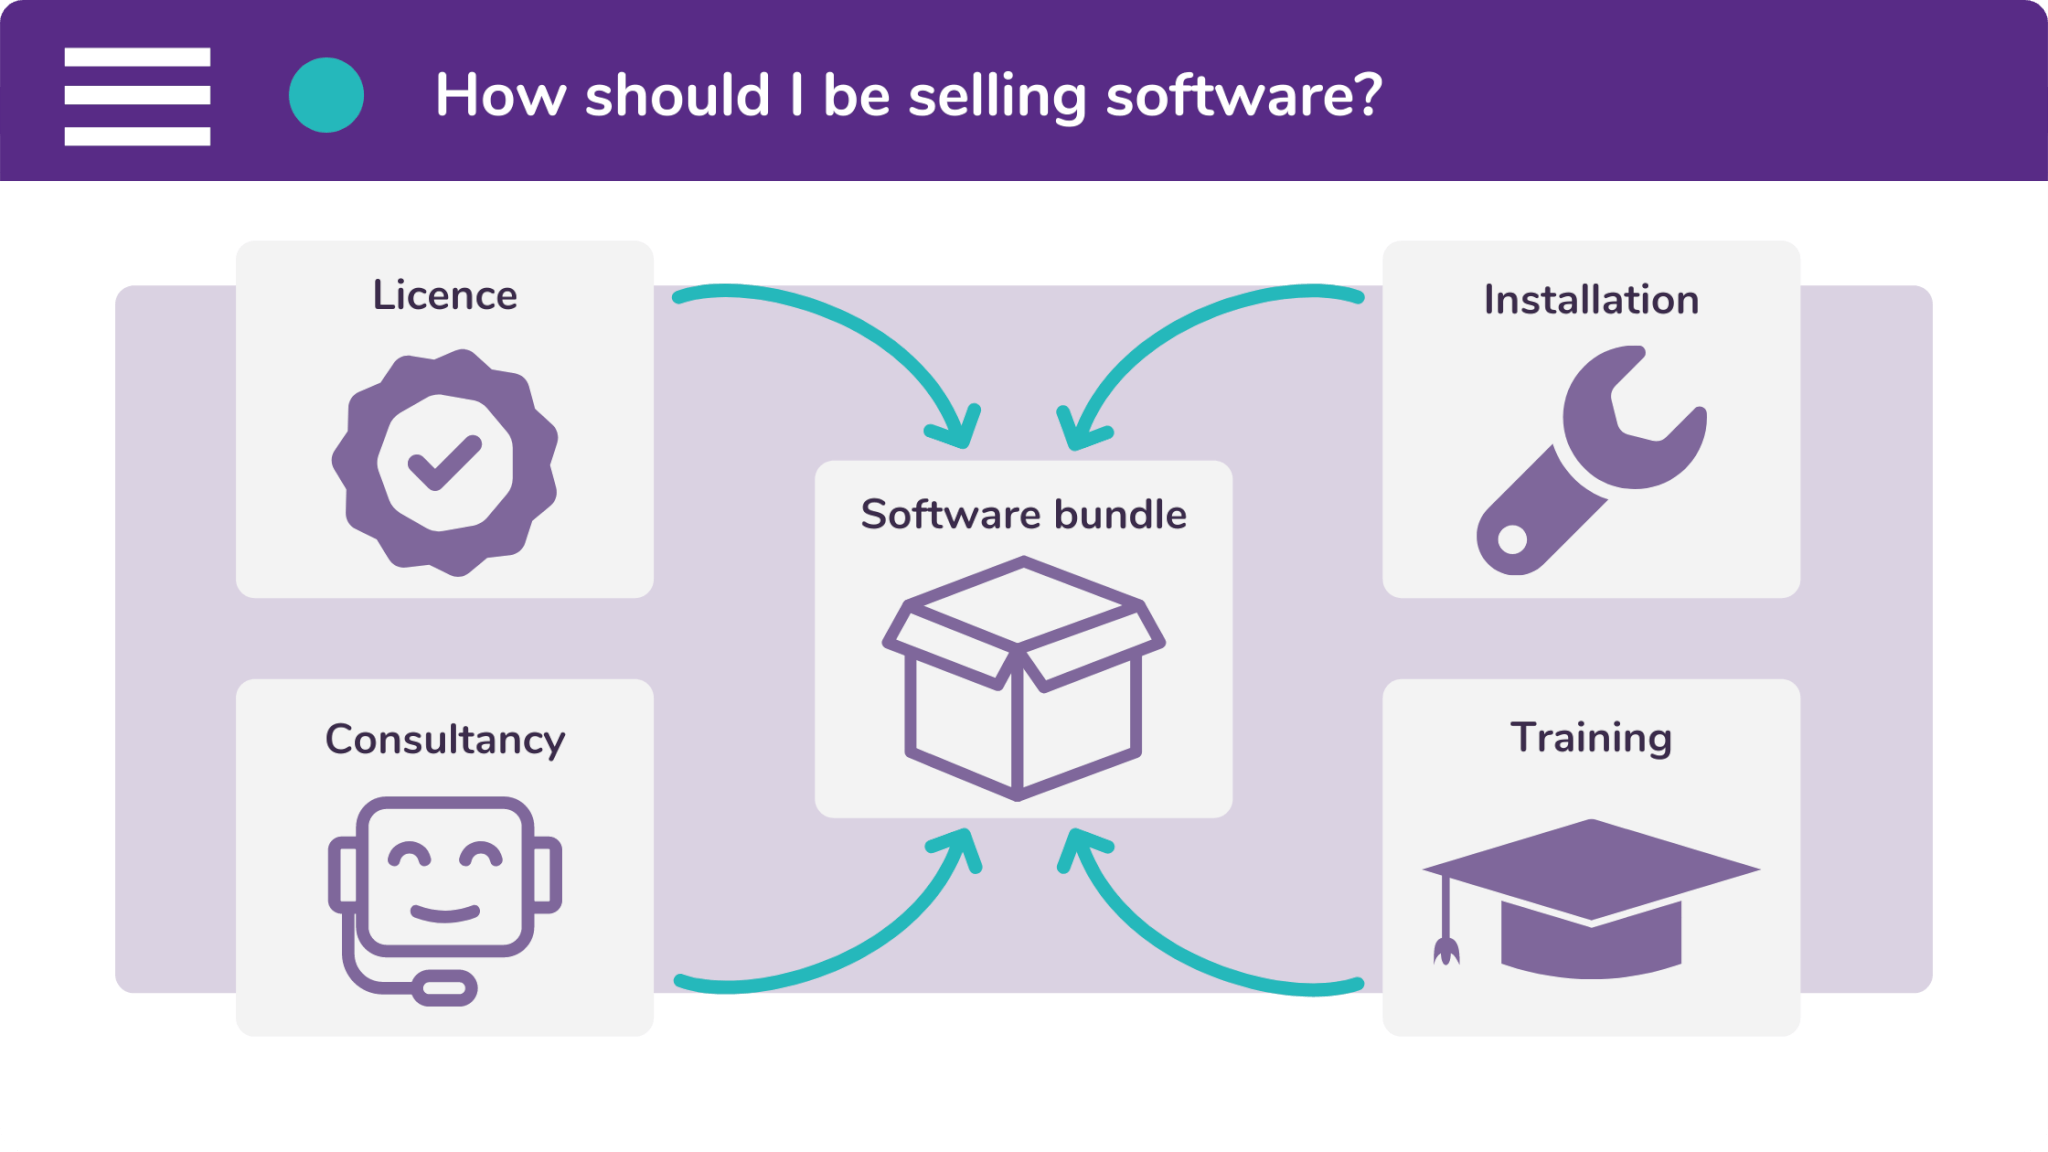 When buying business software, you don't just buy the licence. You also purchase installation, consultancy, and training.